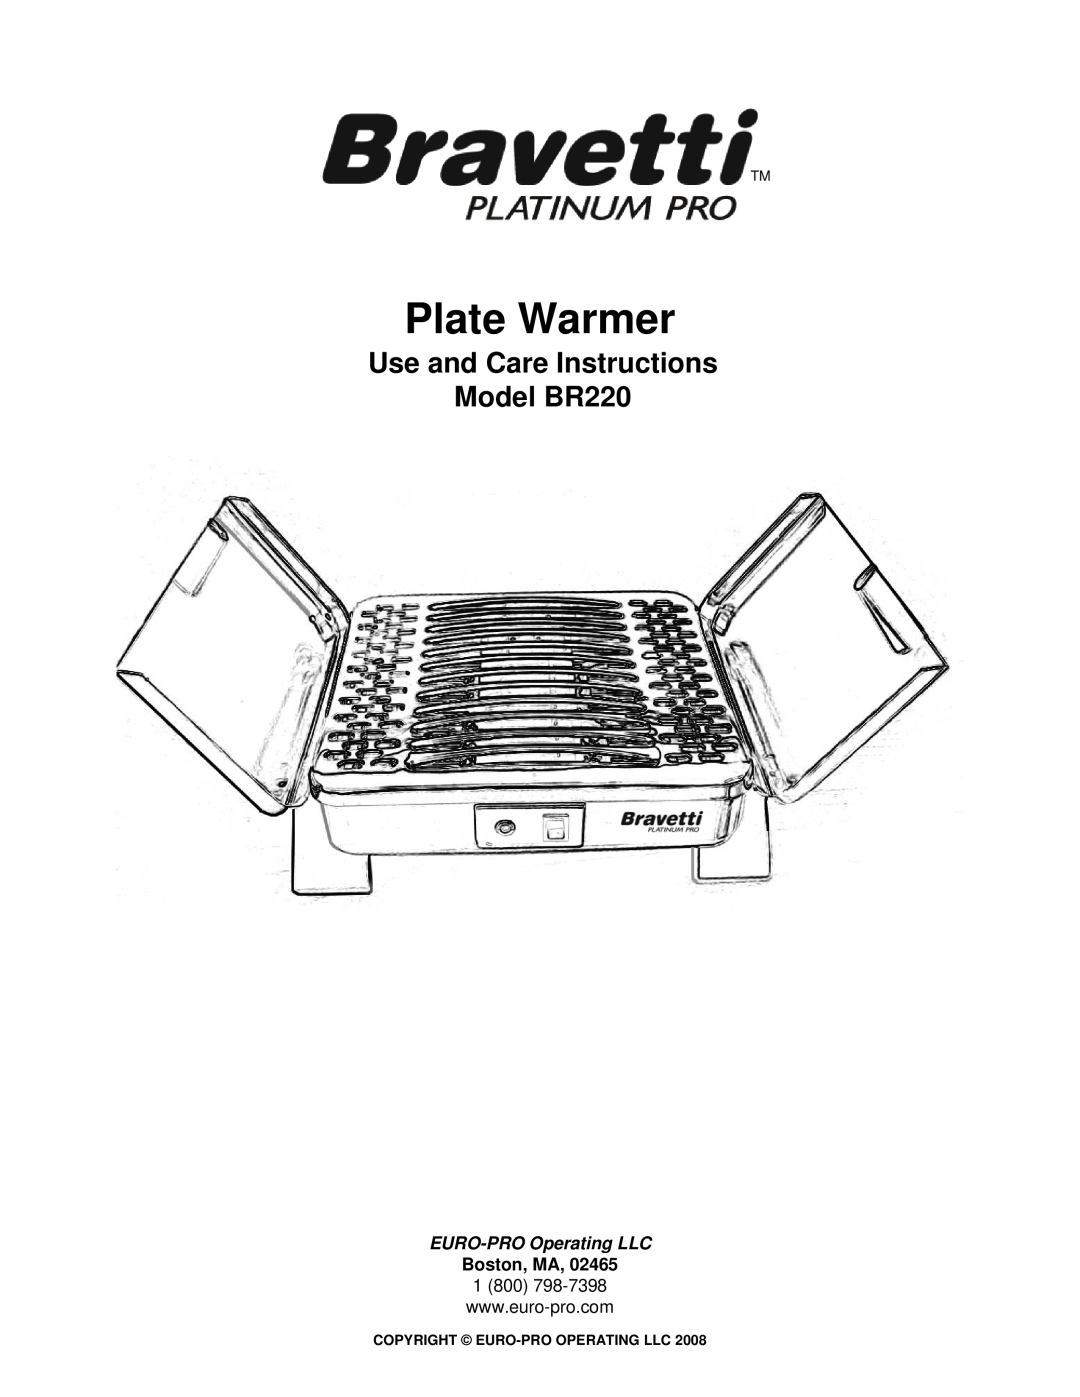 Bravetti manual Plate Warmer, Use and Care Instructions Model BR220, EURO-PRO Operating LLC 